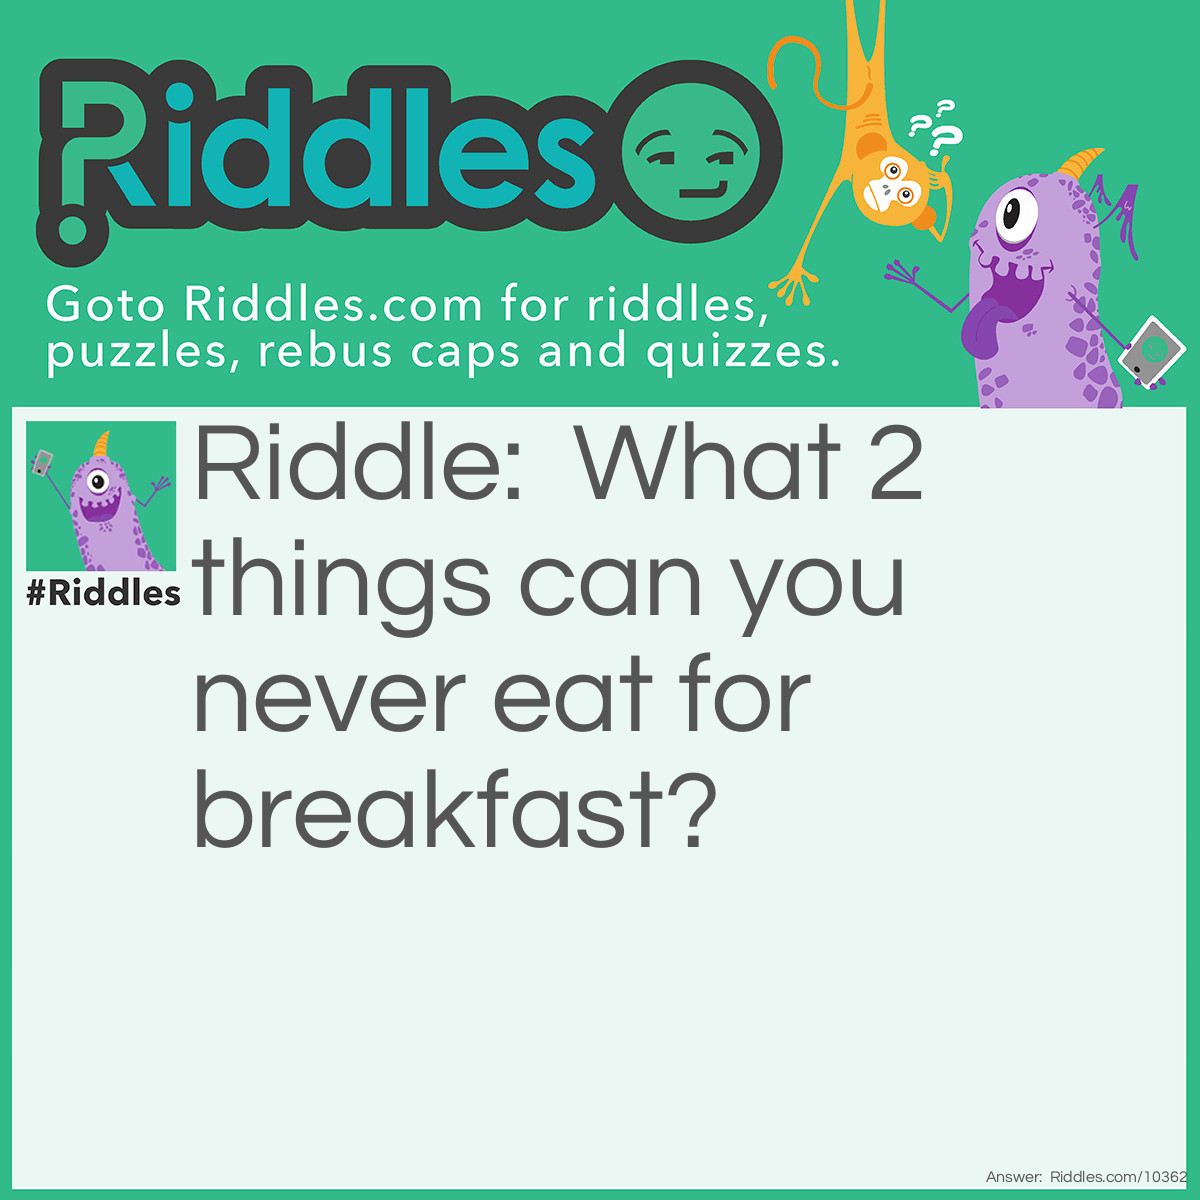 Riddle: What 2 things can you never eat for breakfast? Answer: Lunch and dinner